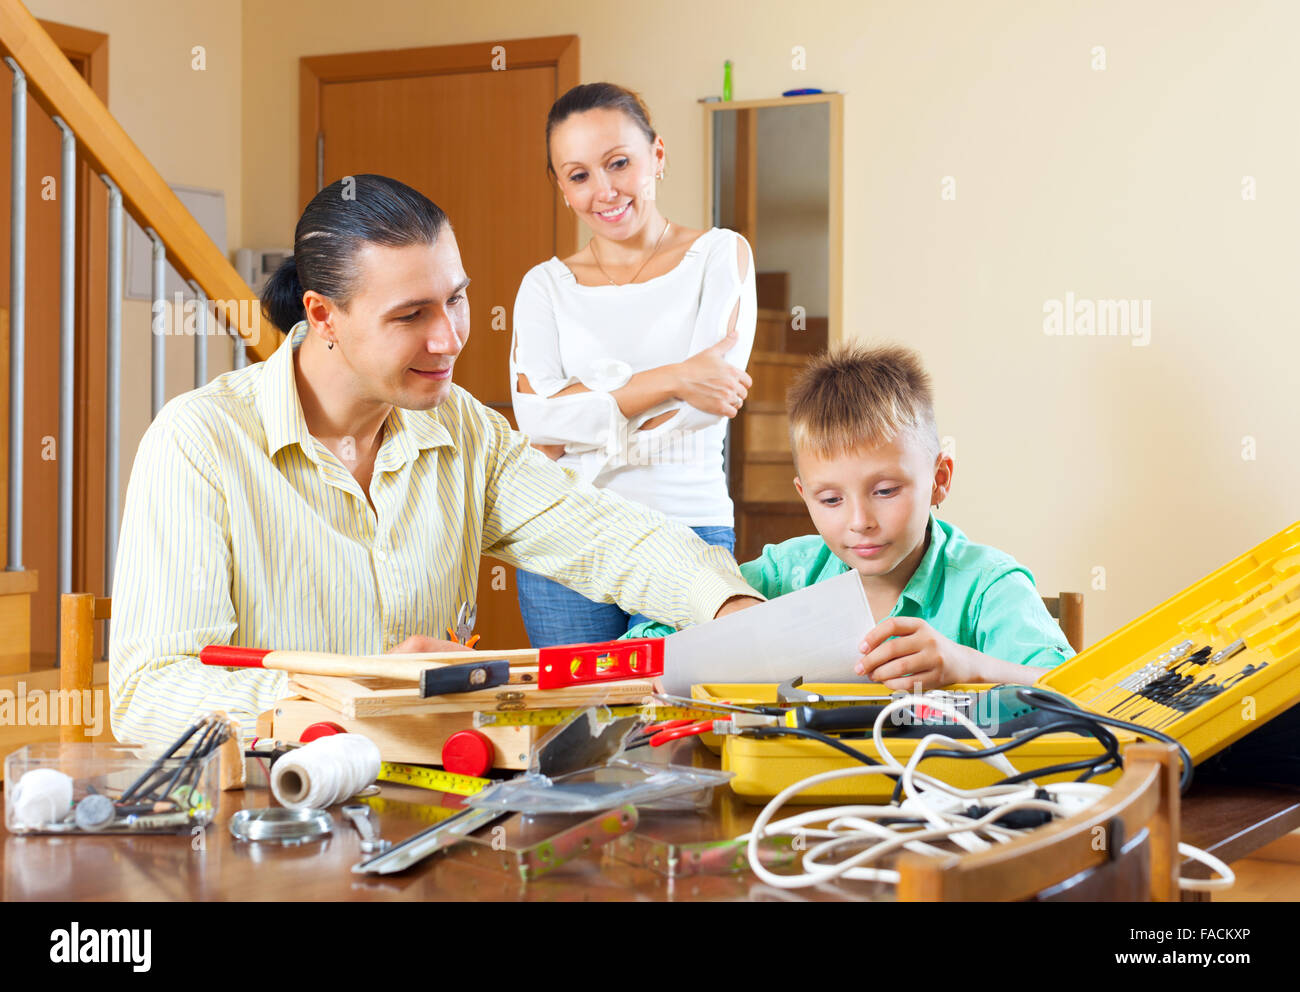 Happy family of three with teenage boy doing something with the working tools Stock Photo